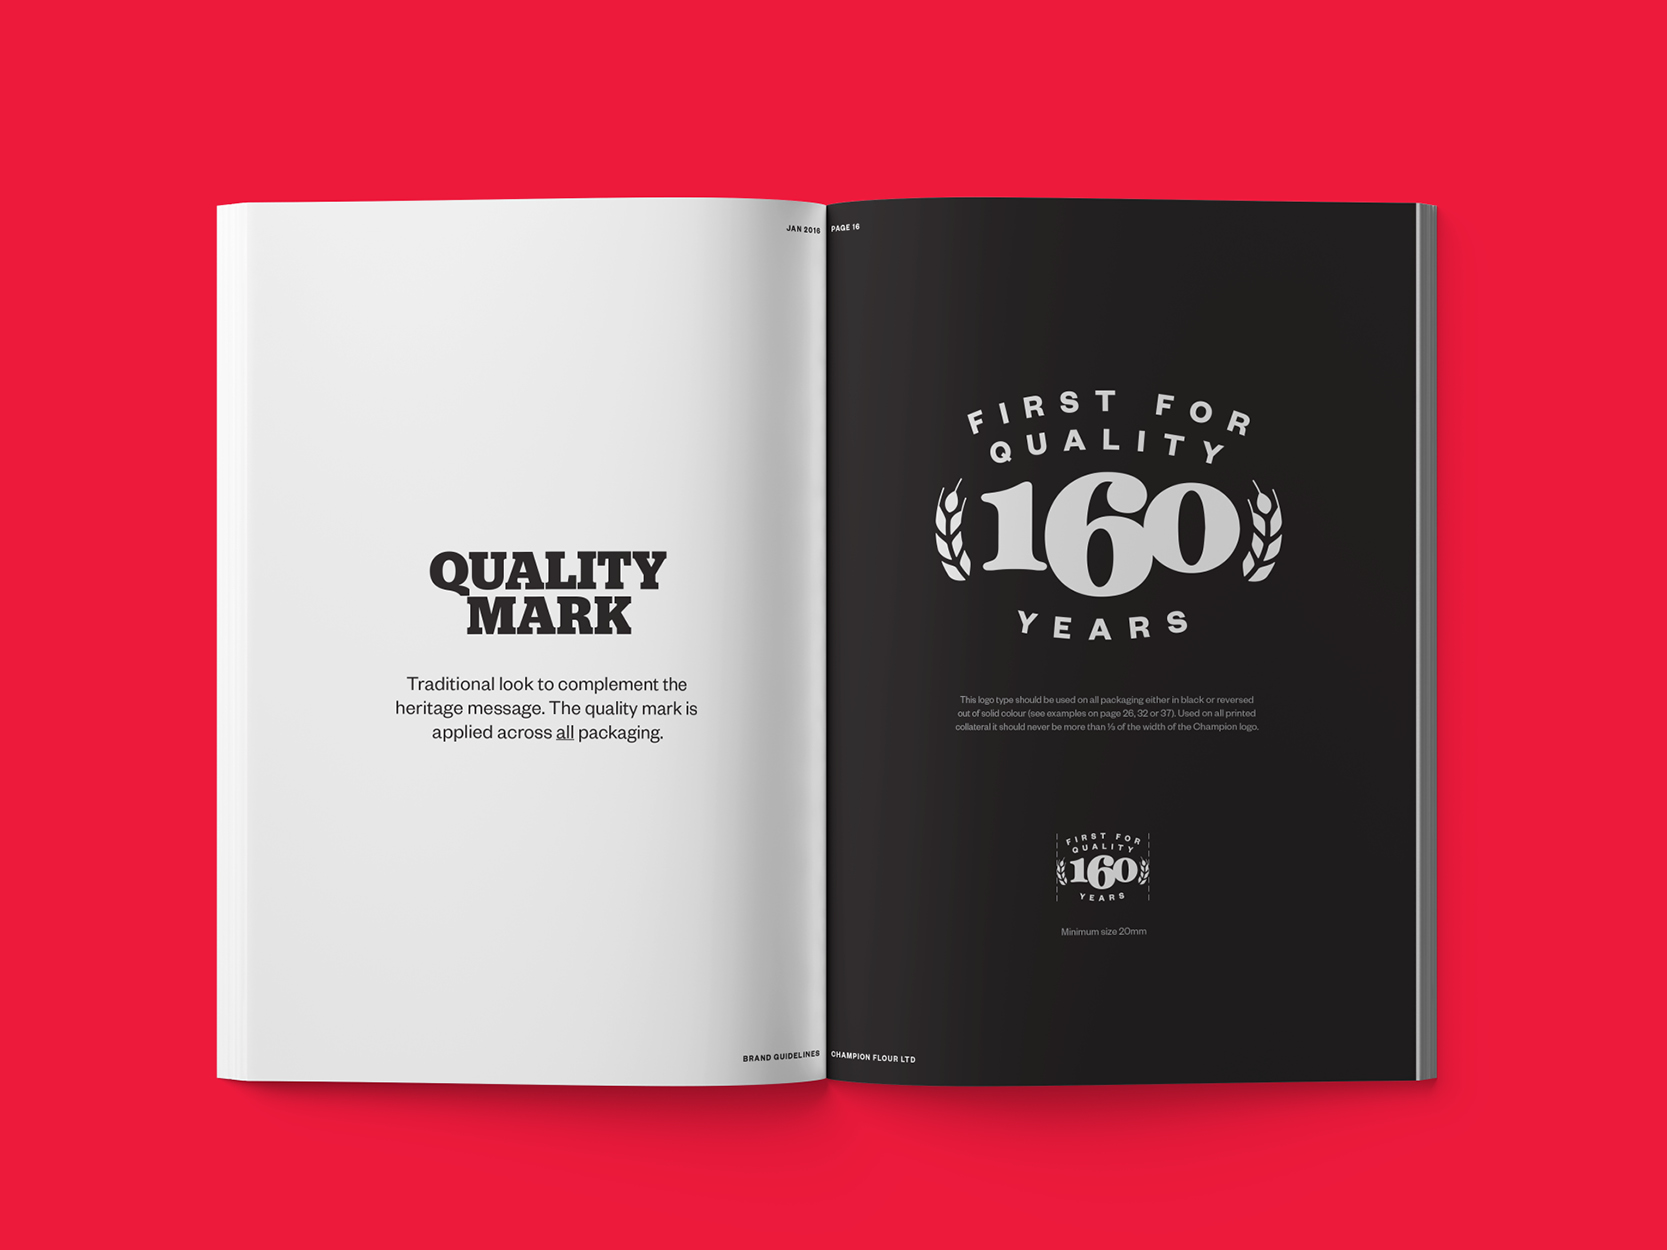 Open pages of brand guidelines showing a quality mark